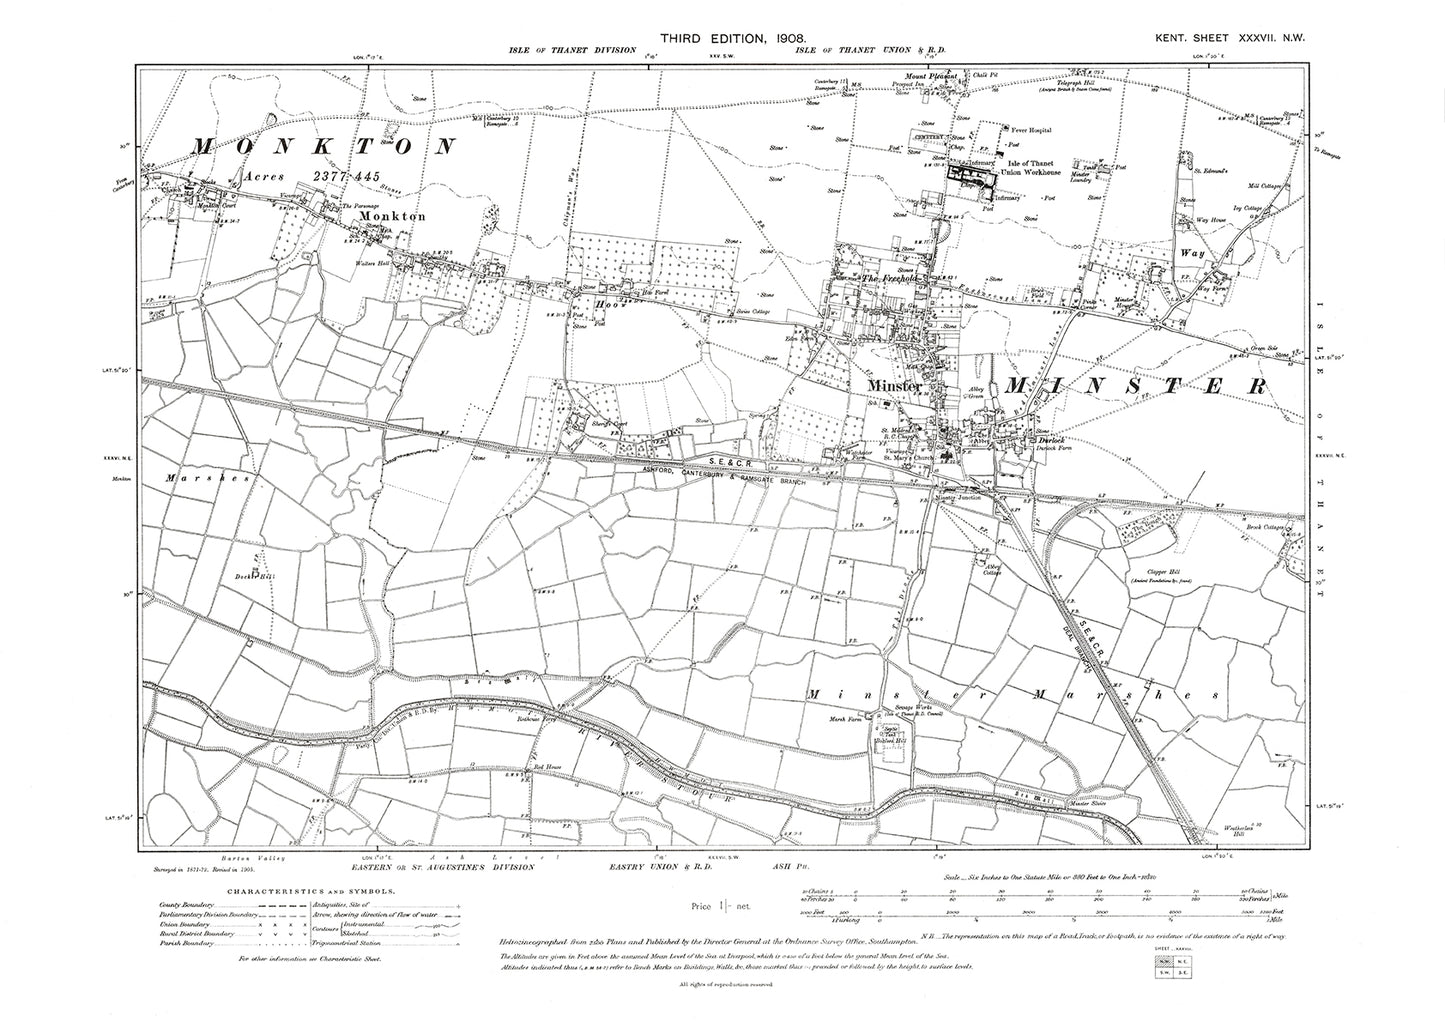 Minster, Monkton, old map Kent 1908: 37NW